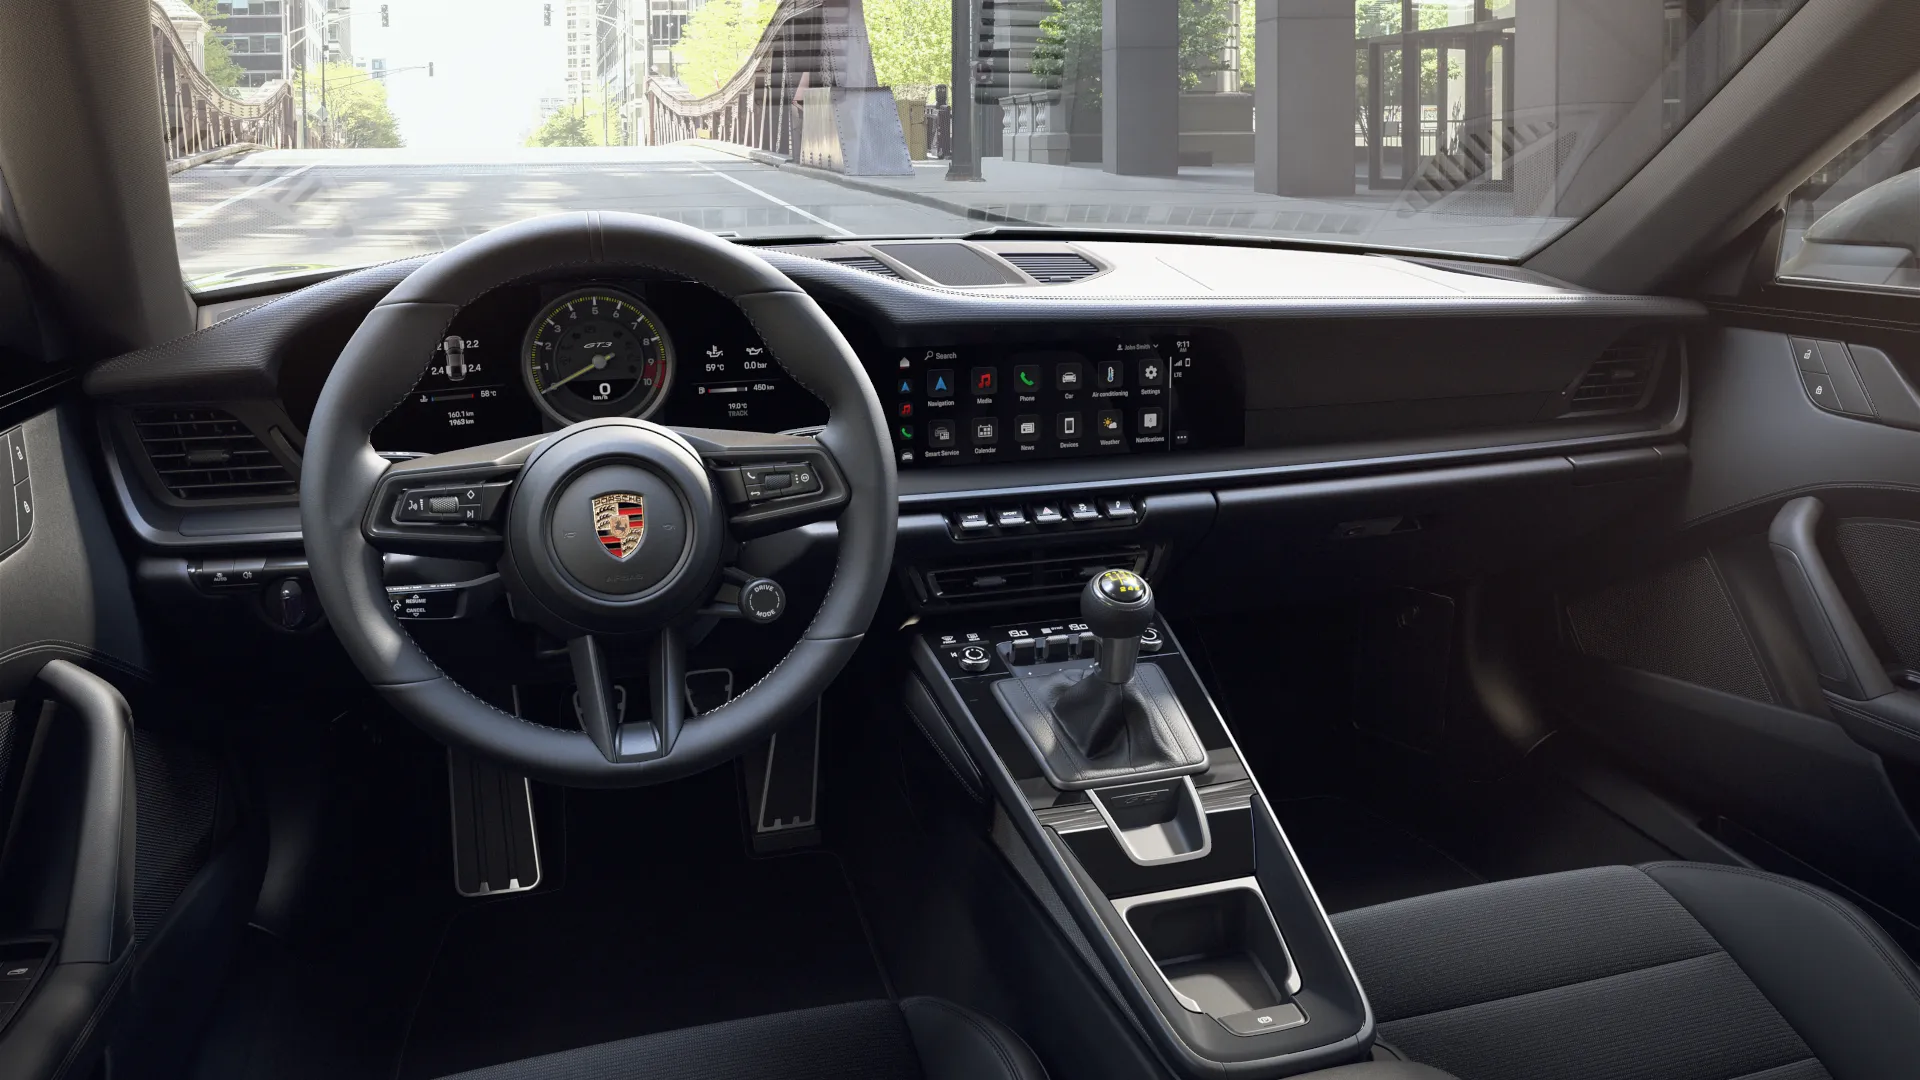 Interior view of 911 GT3 with Touring Package